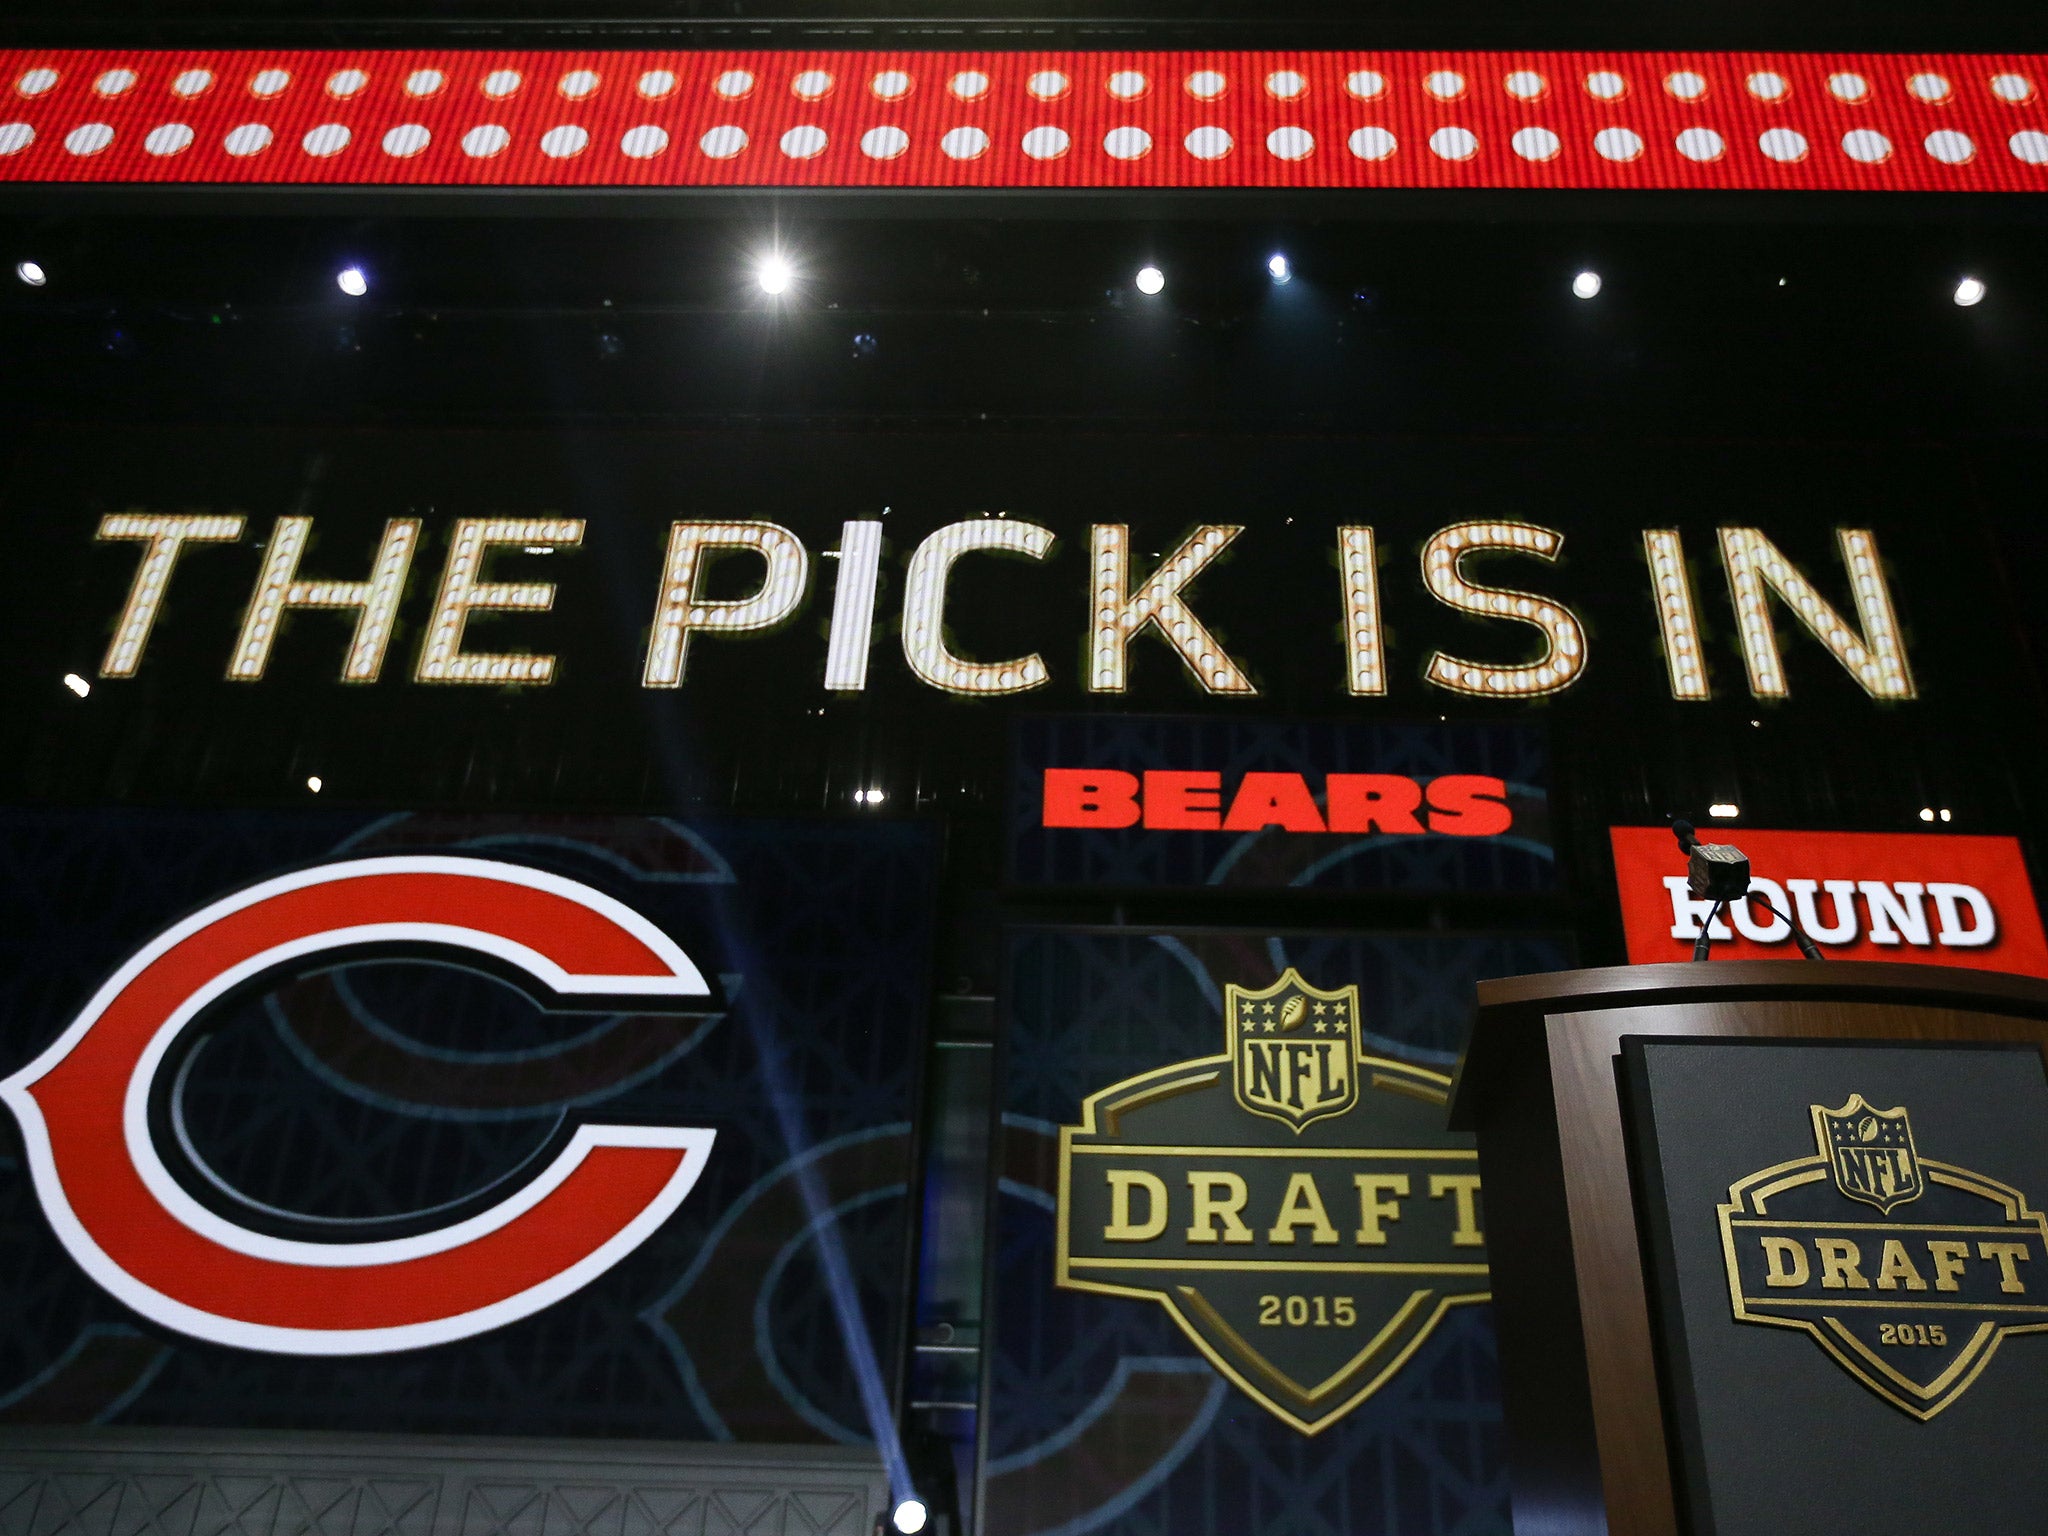 The NFL Draft is the biggest event on the off-season calendar